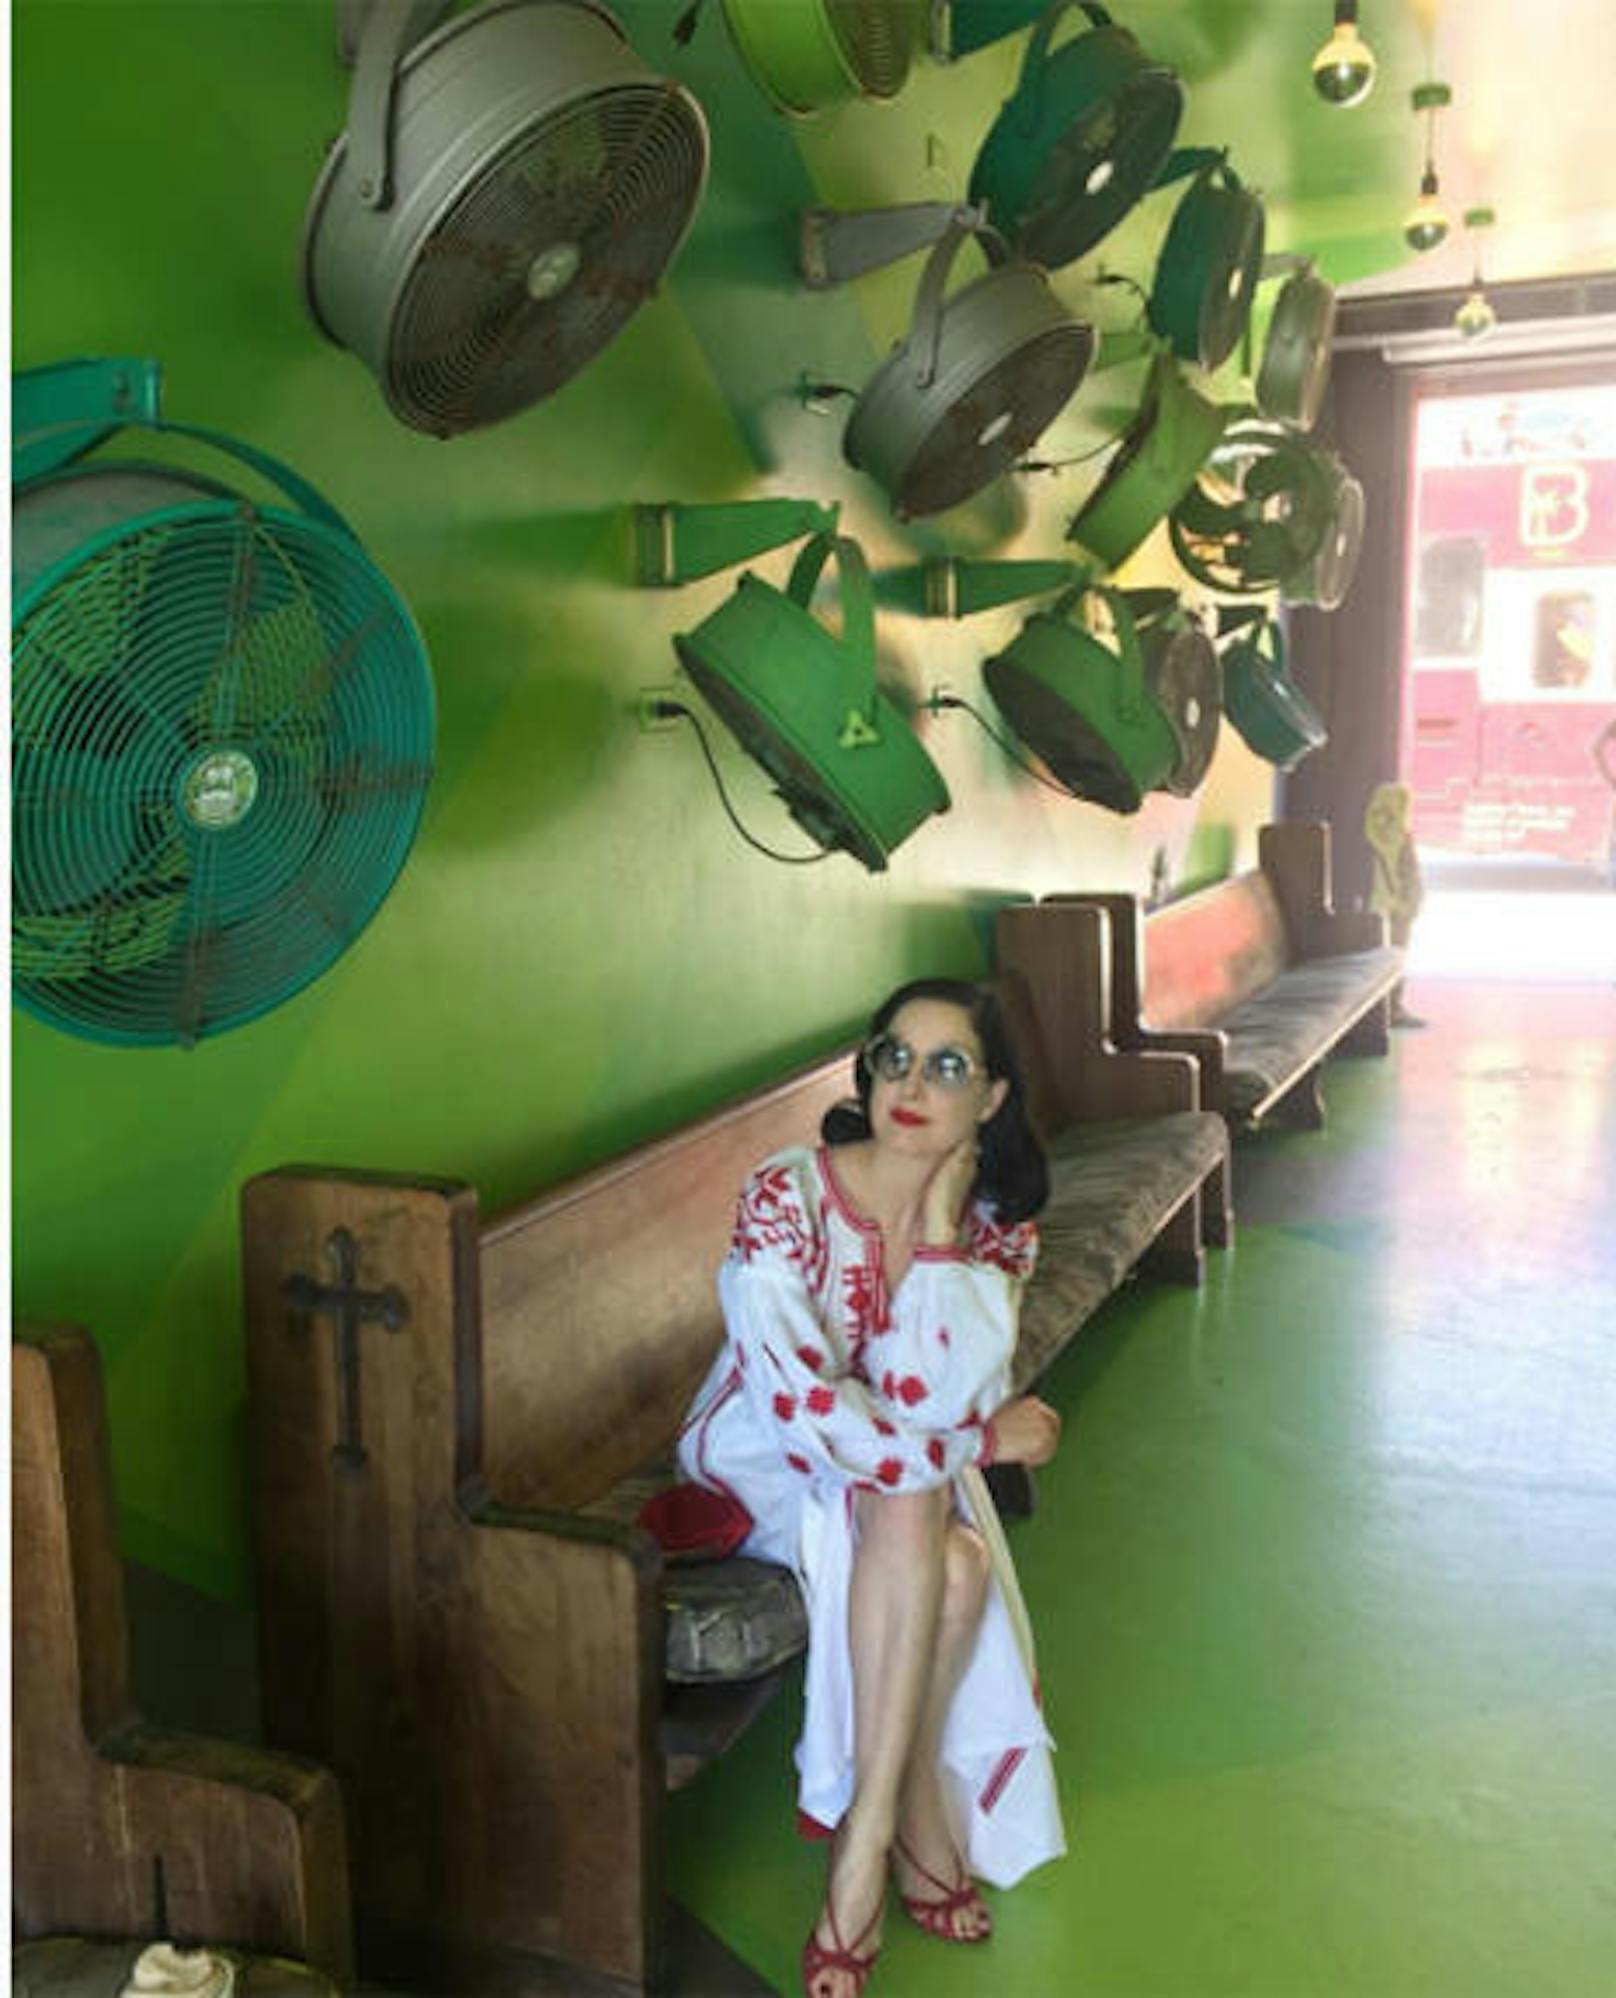 01.09.2017: Dita von Teese zeigt Humor: "Hanging out with my fans here in #miami at #wynwood" 